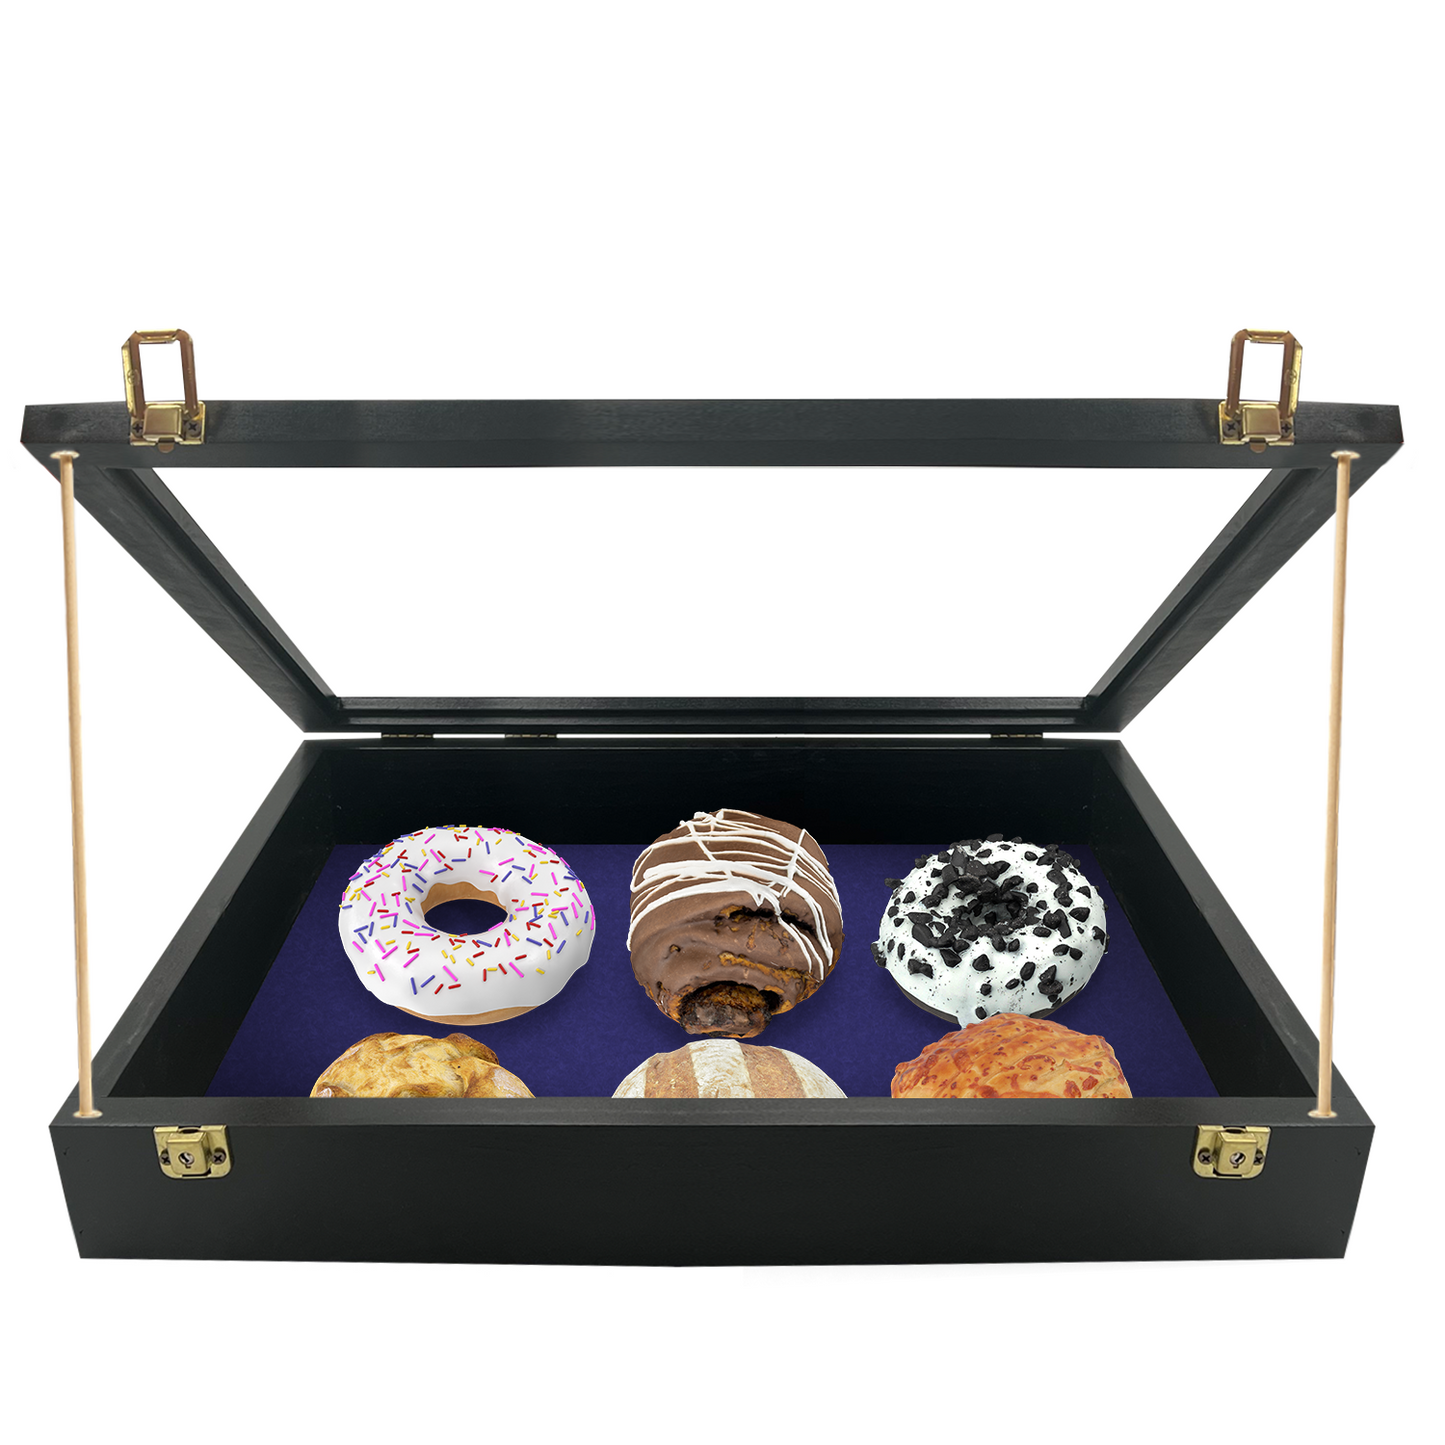 Trade Show Display Case - Small - 18 x 22 x 3"